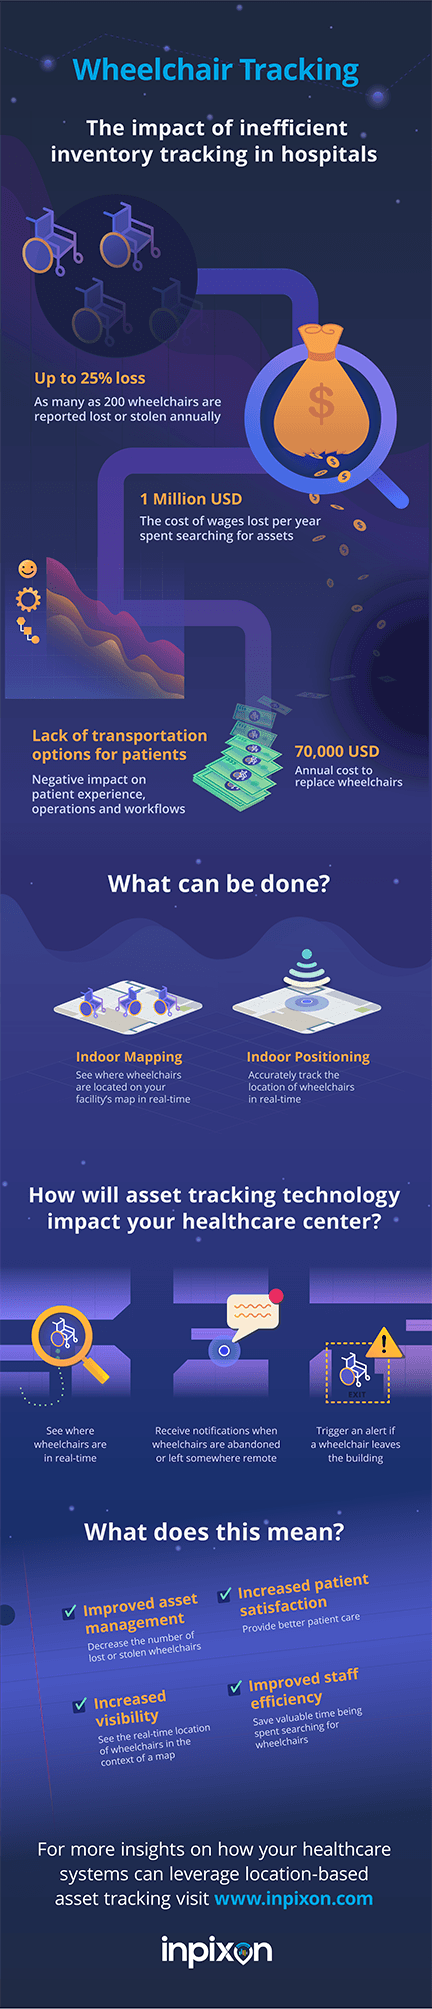 hospital-wheelchair-asset-tracking-infographic